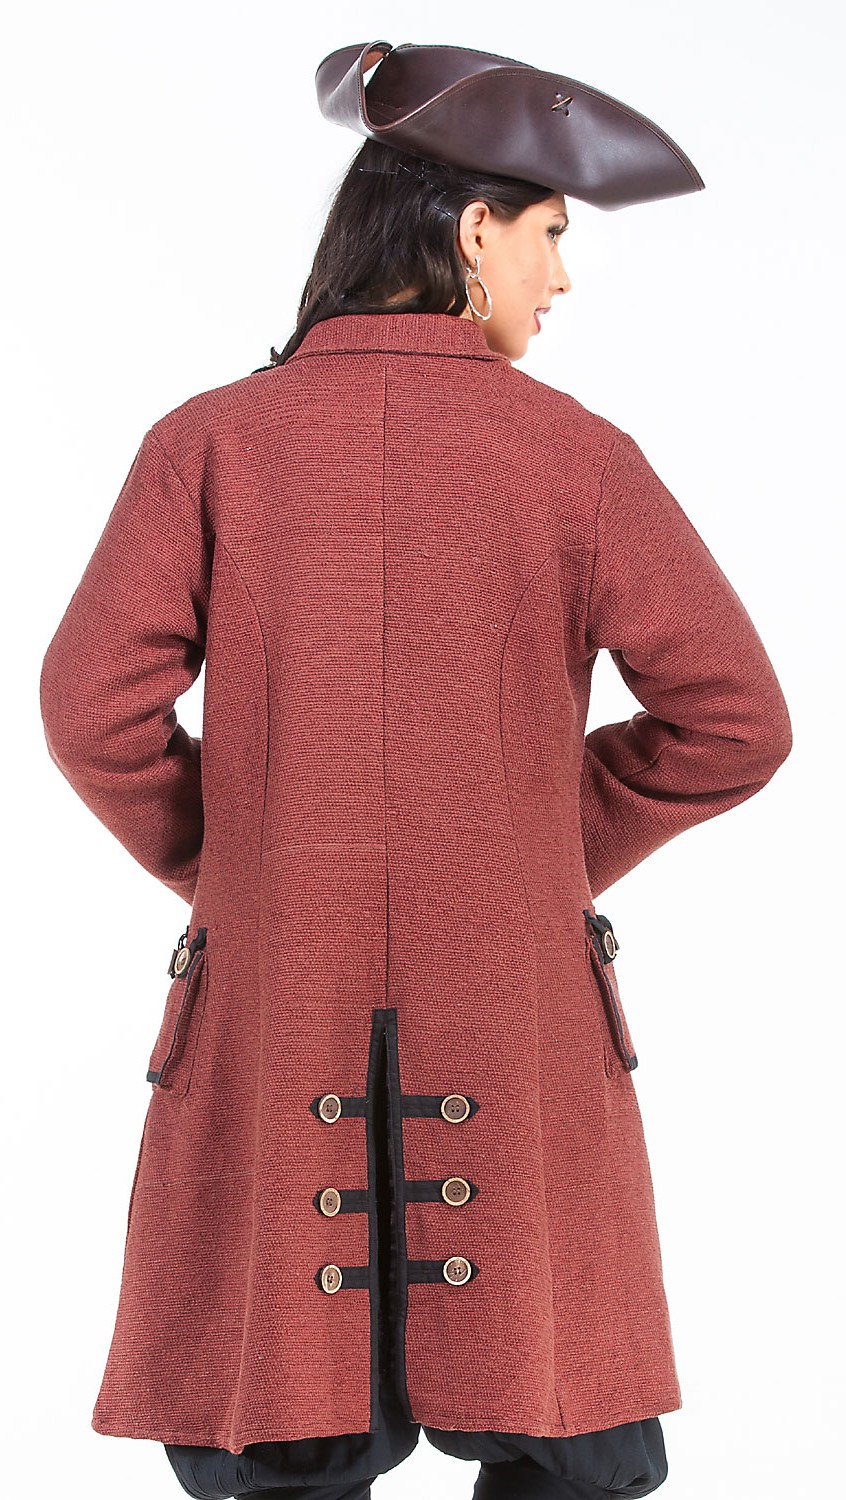 Back view of Capt. Delahaye Pirate Captain Coat, faded red with wood buttons